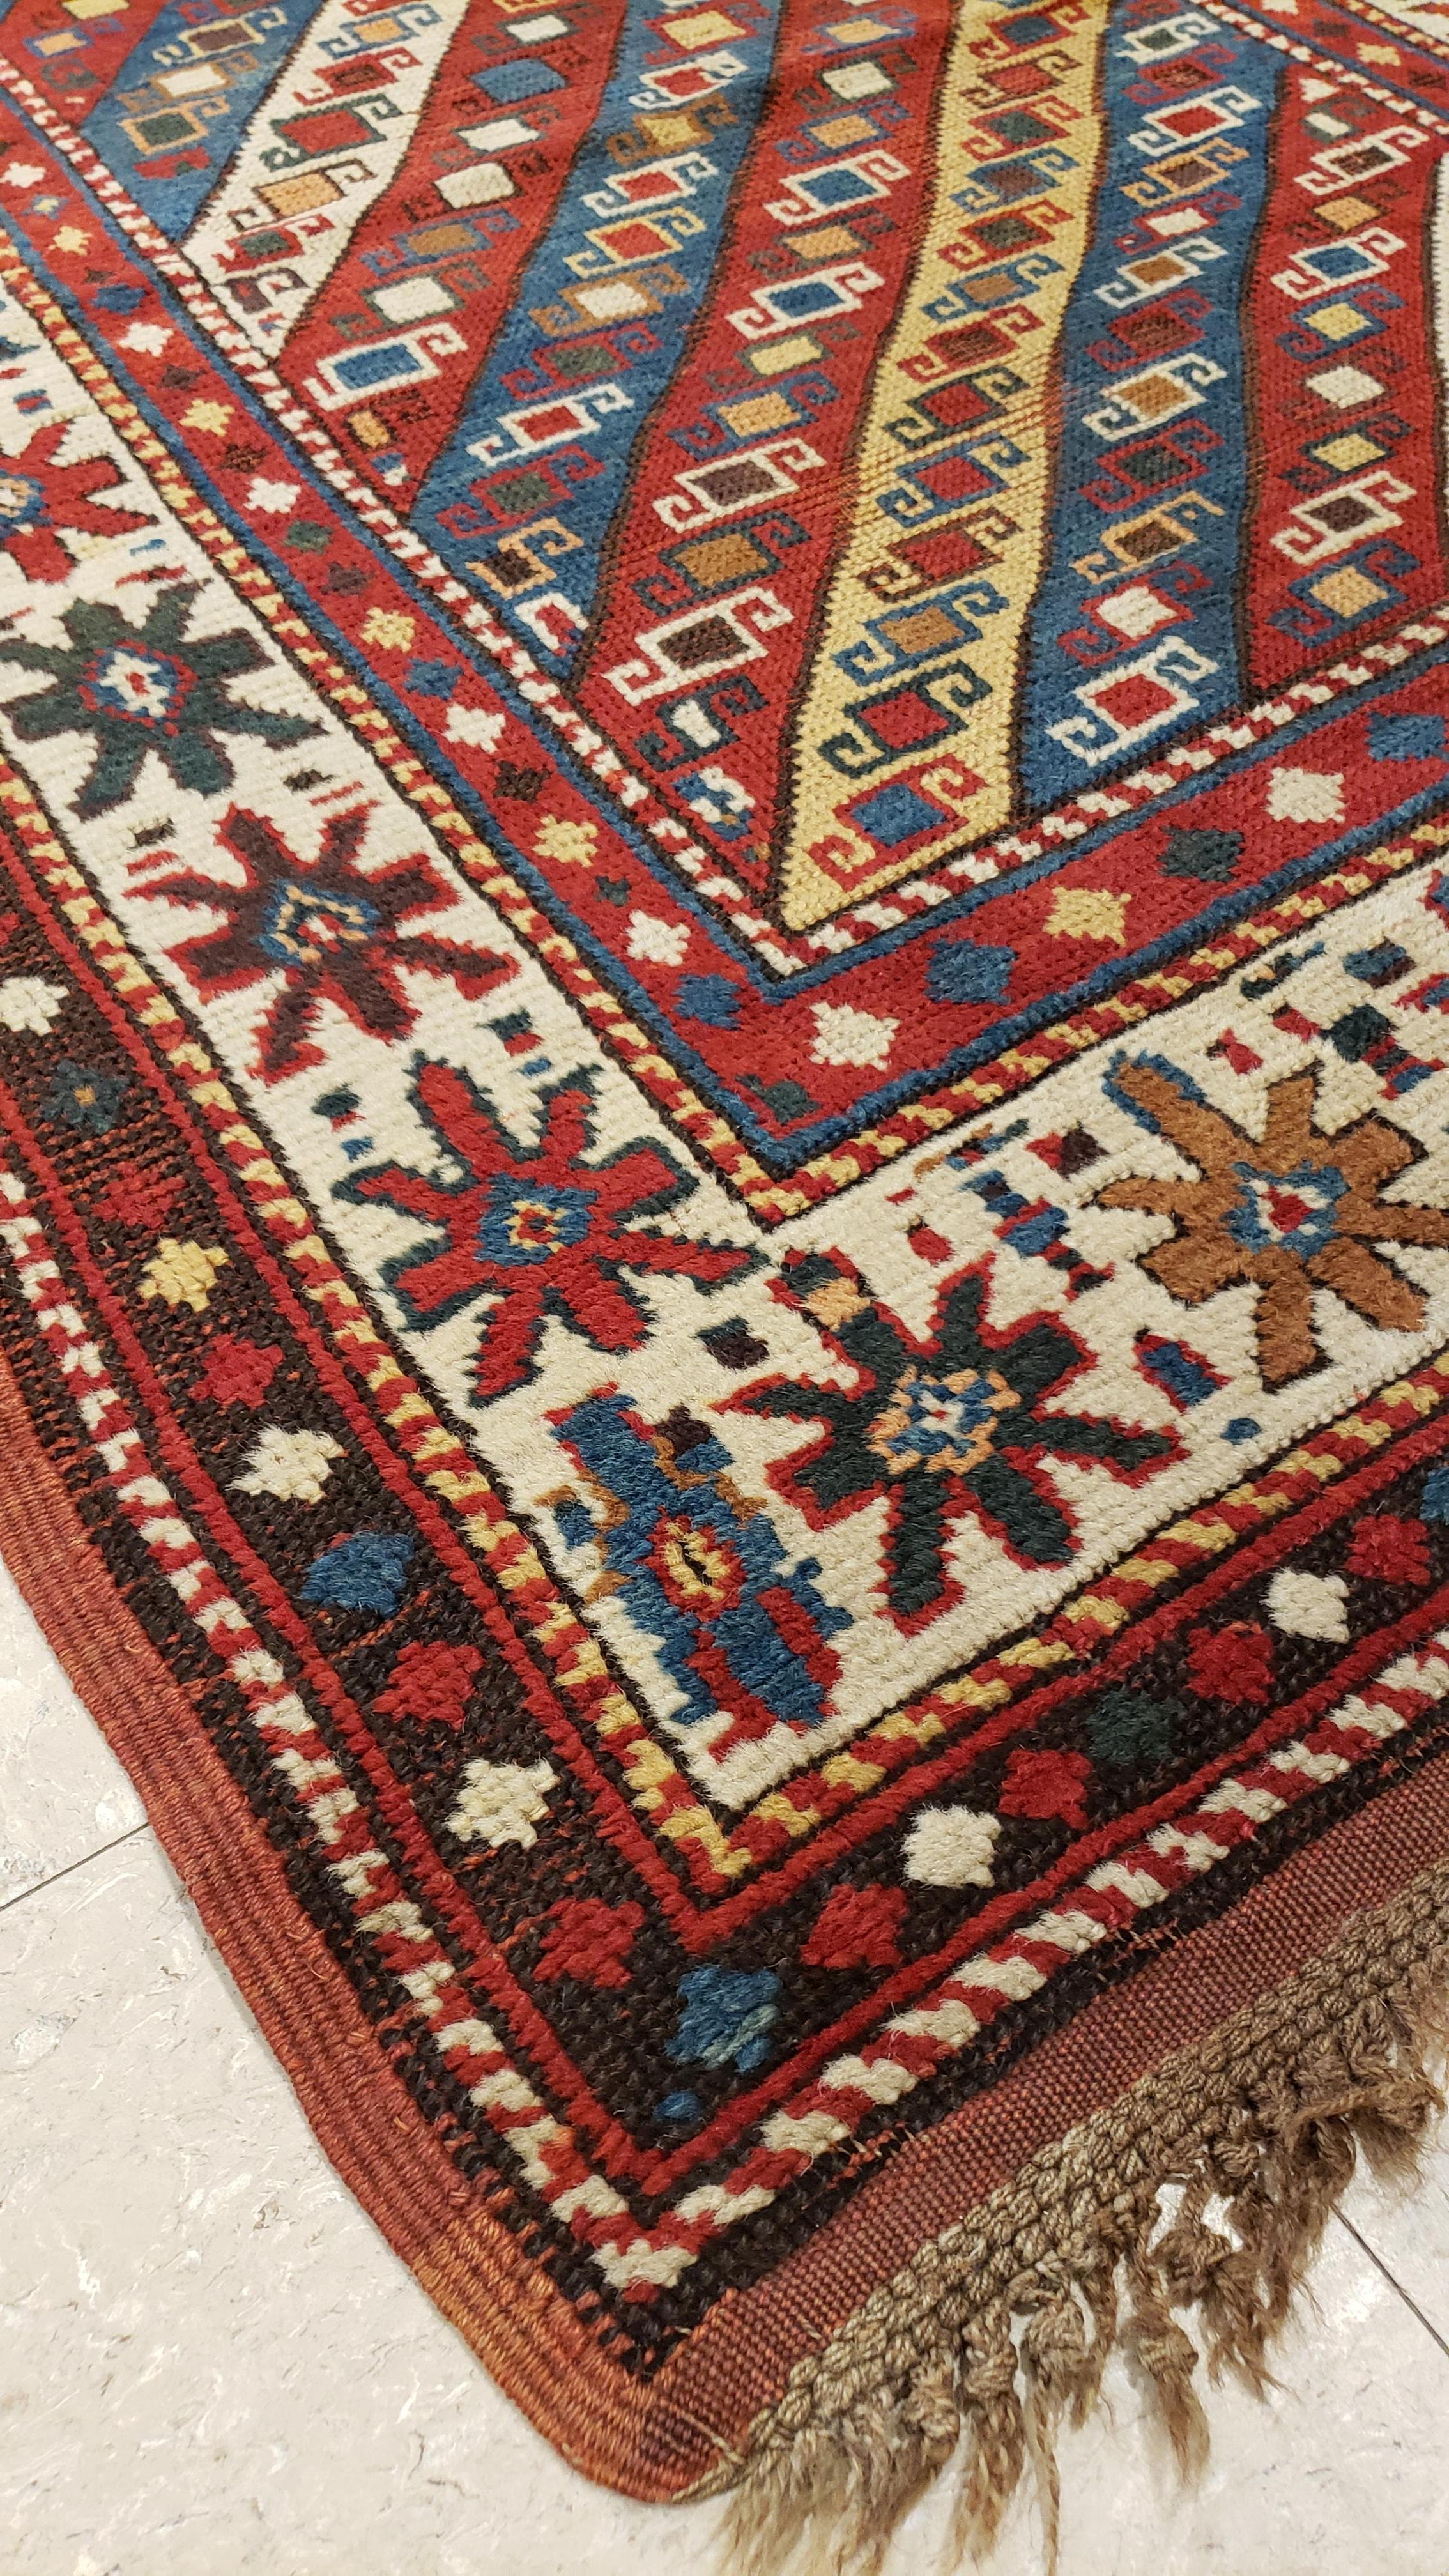 Very unusual design, Kazak rugs are among the most sought after Caucasian rugs. This Kazak is a great example of a 19th century collectible piece. Measures: 3'3